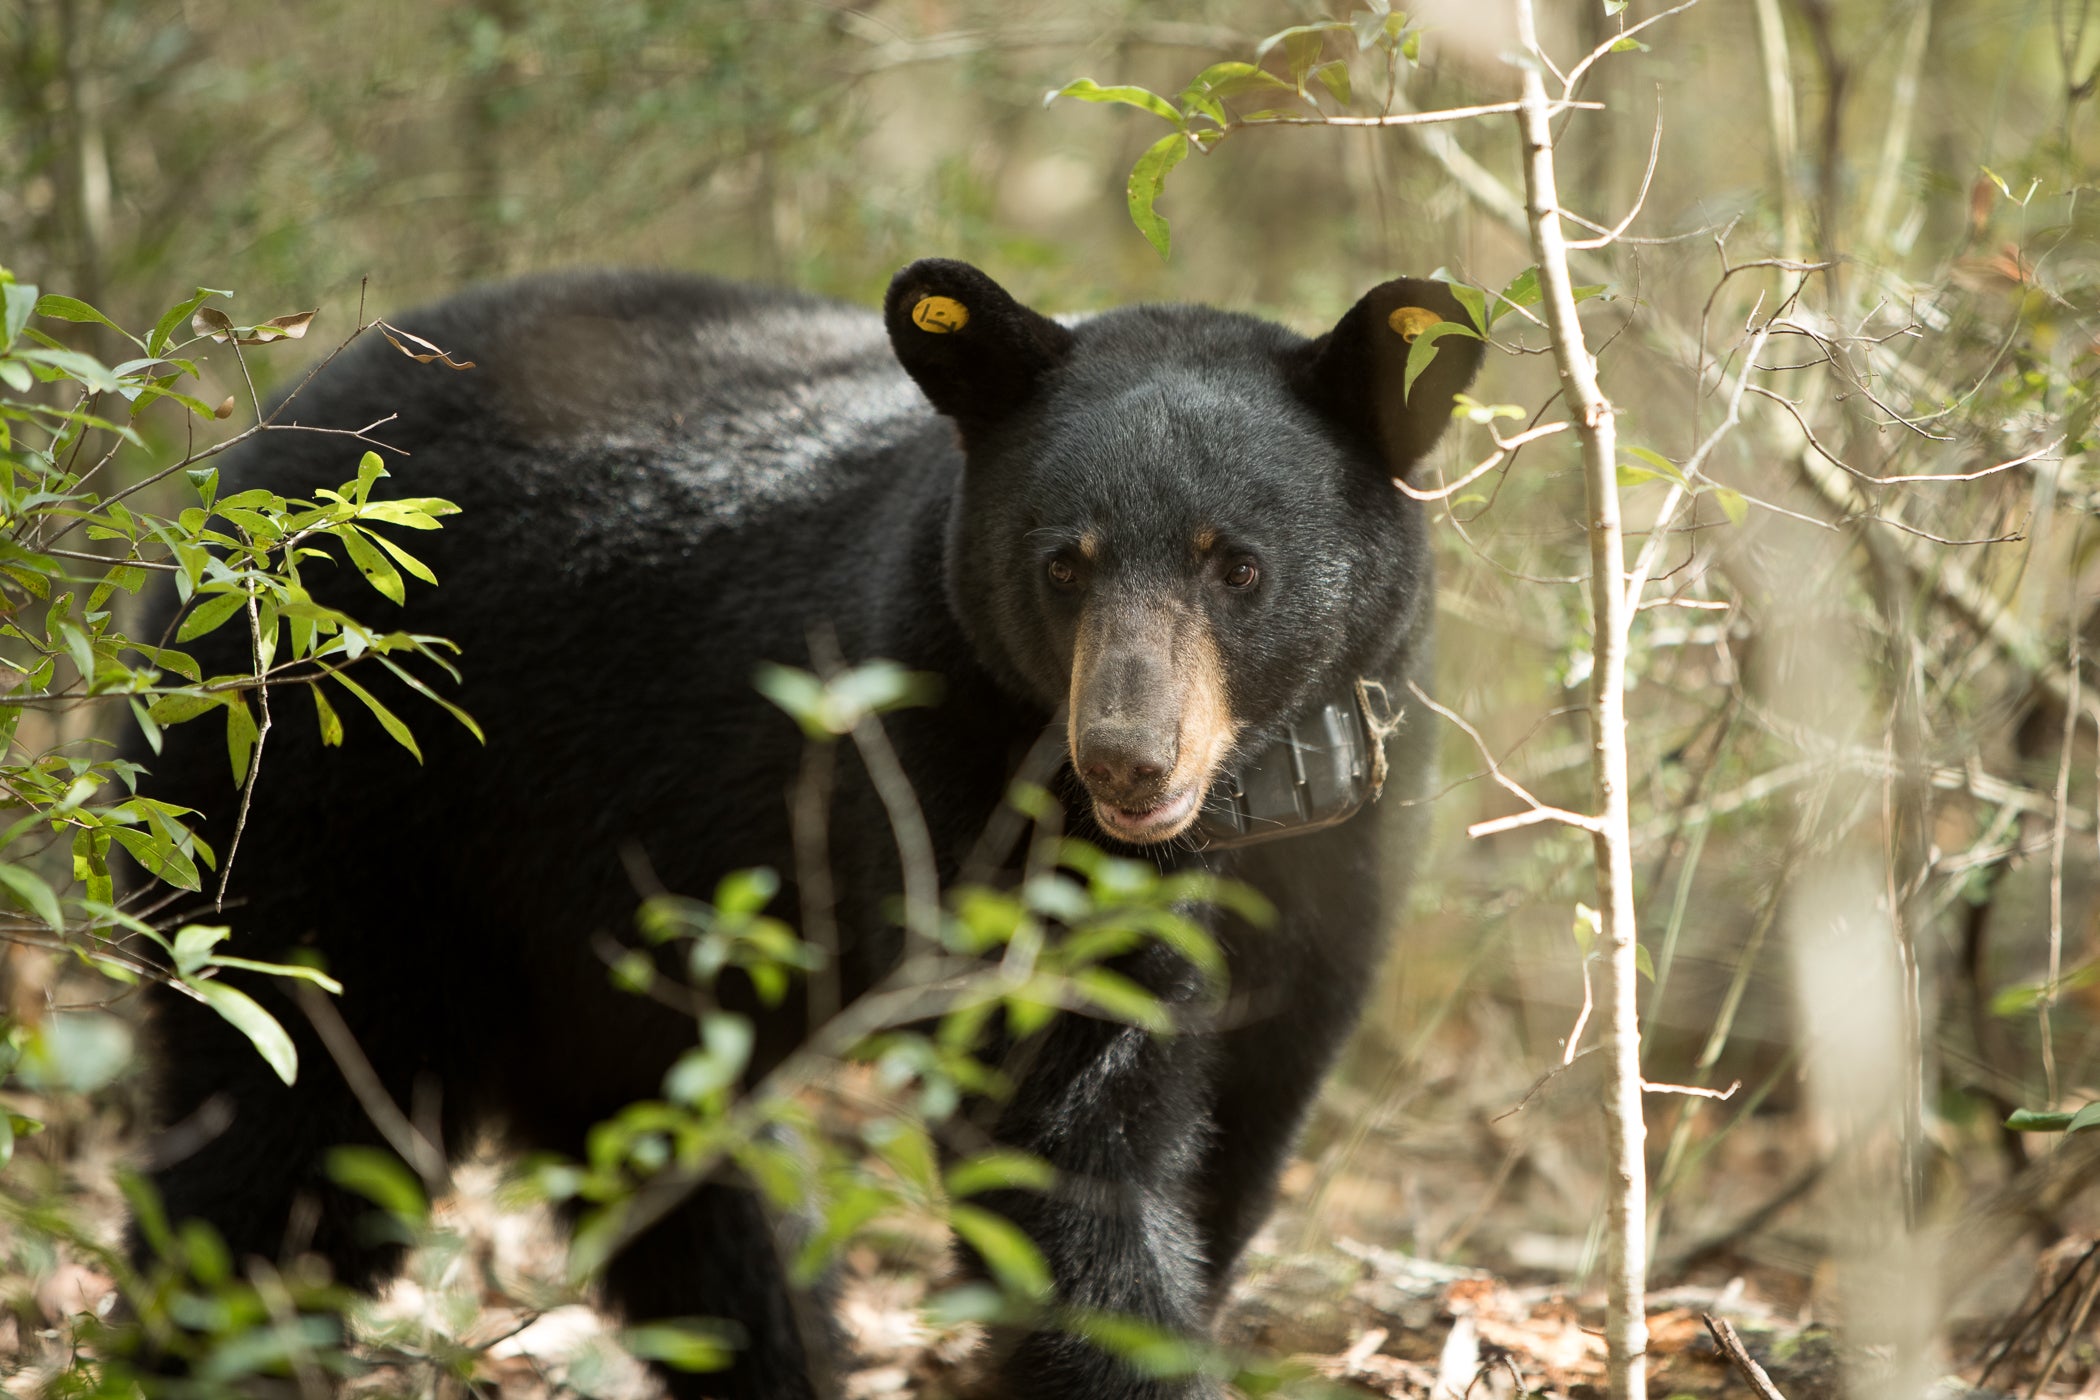 Black bears like this one in southwest Alabama are being researched by biologists to determine population and movement, among other factors.